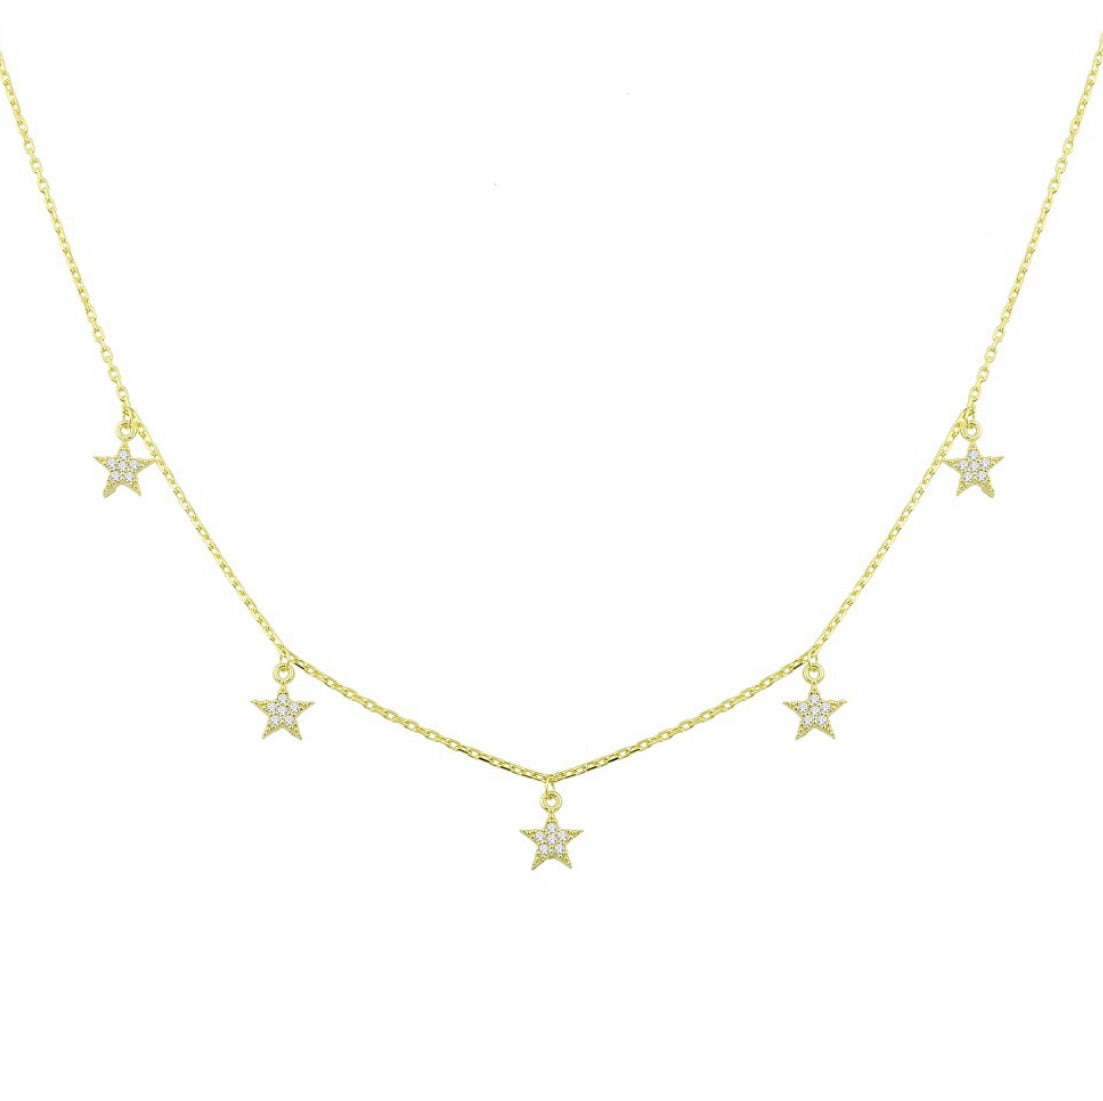 Shiny Star Necklace with Cubic Zirconias - 925 Sterling Silver, Yellow Gold Plating, 16-18" Length" - Jewelry & Watches - Bijou Her -  -  - 